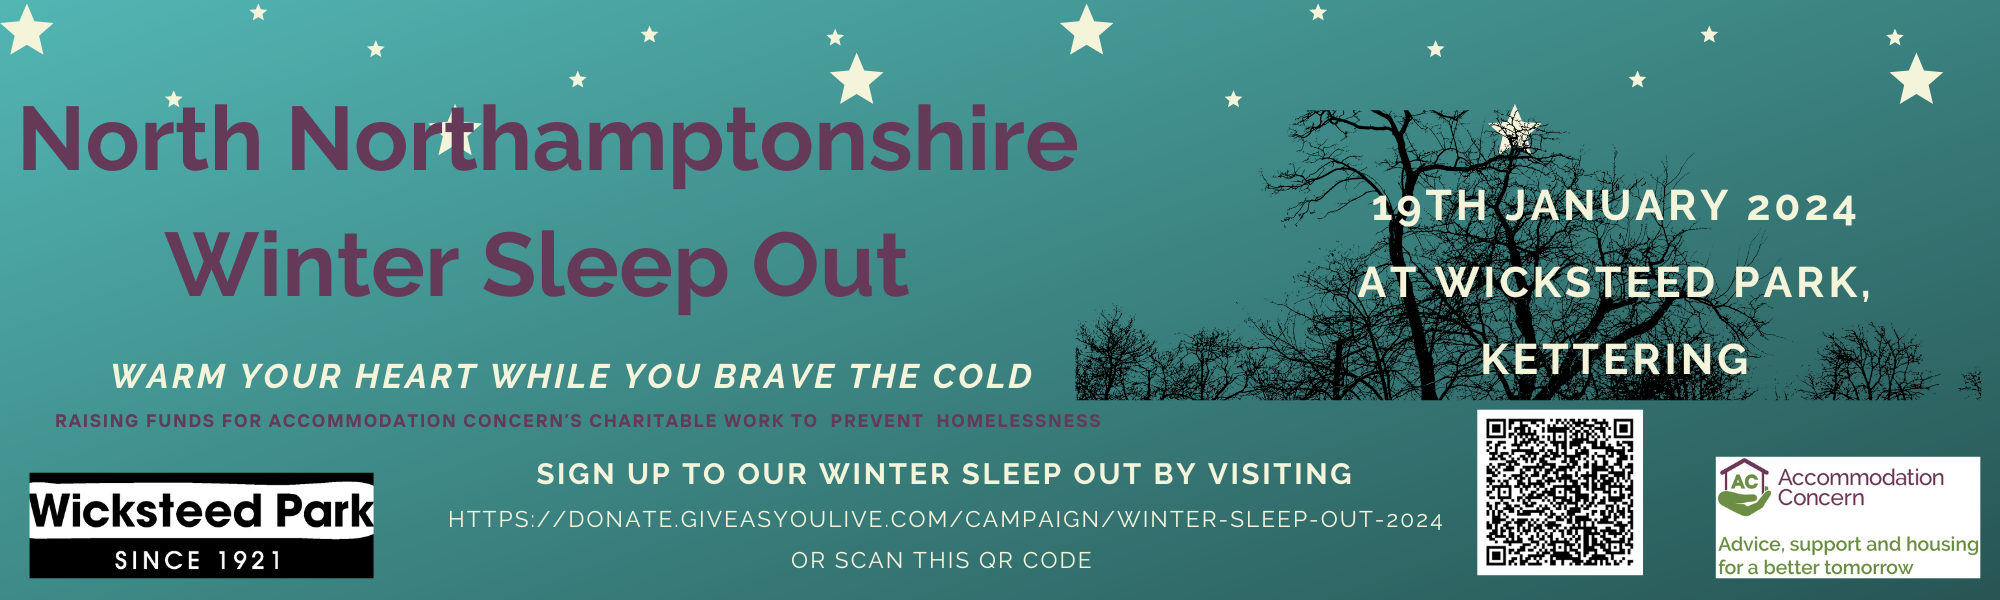 North Northamptonshire Winter Sleepout – 19th January 2024 – Wicksteed Park, Kettering